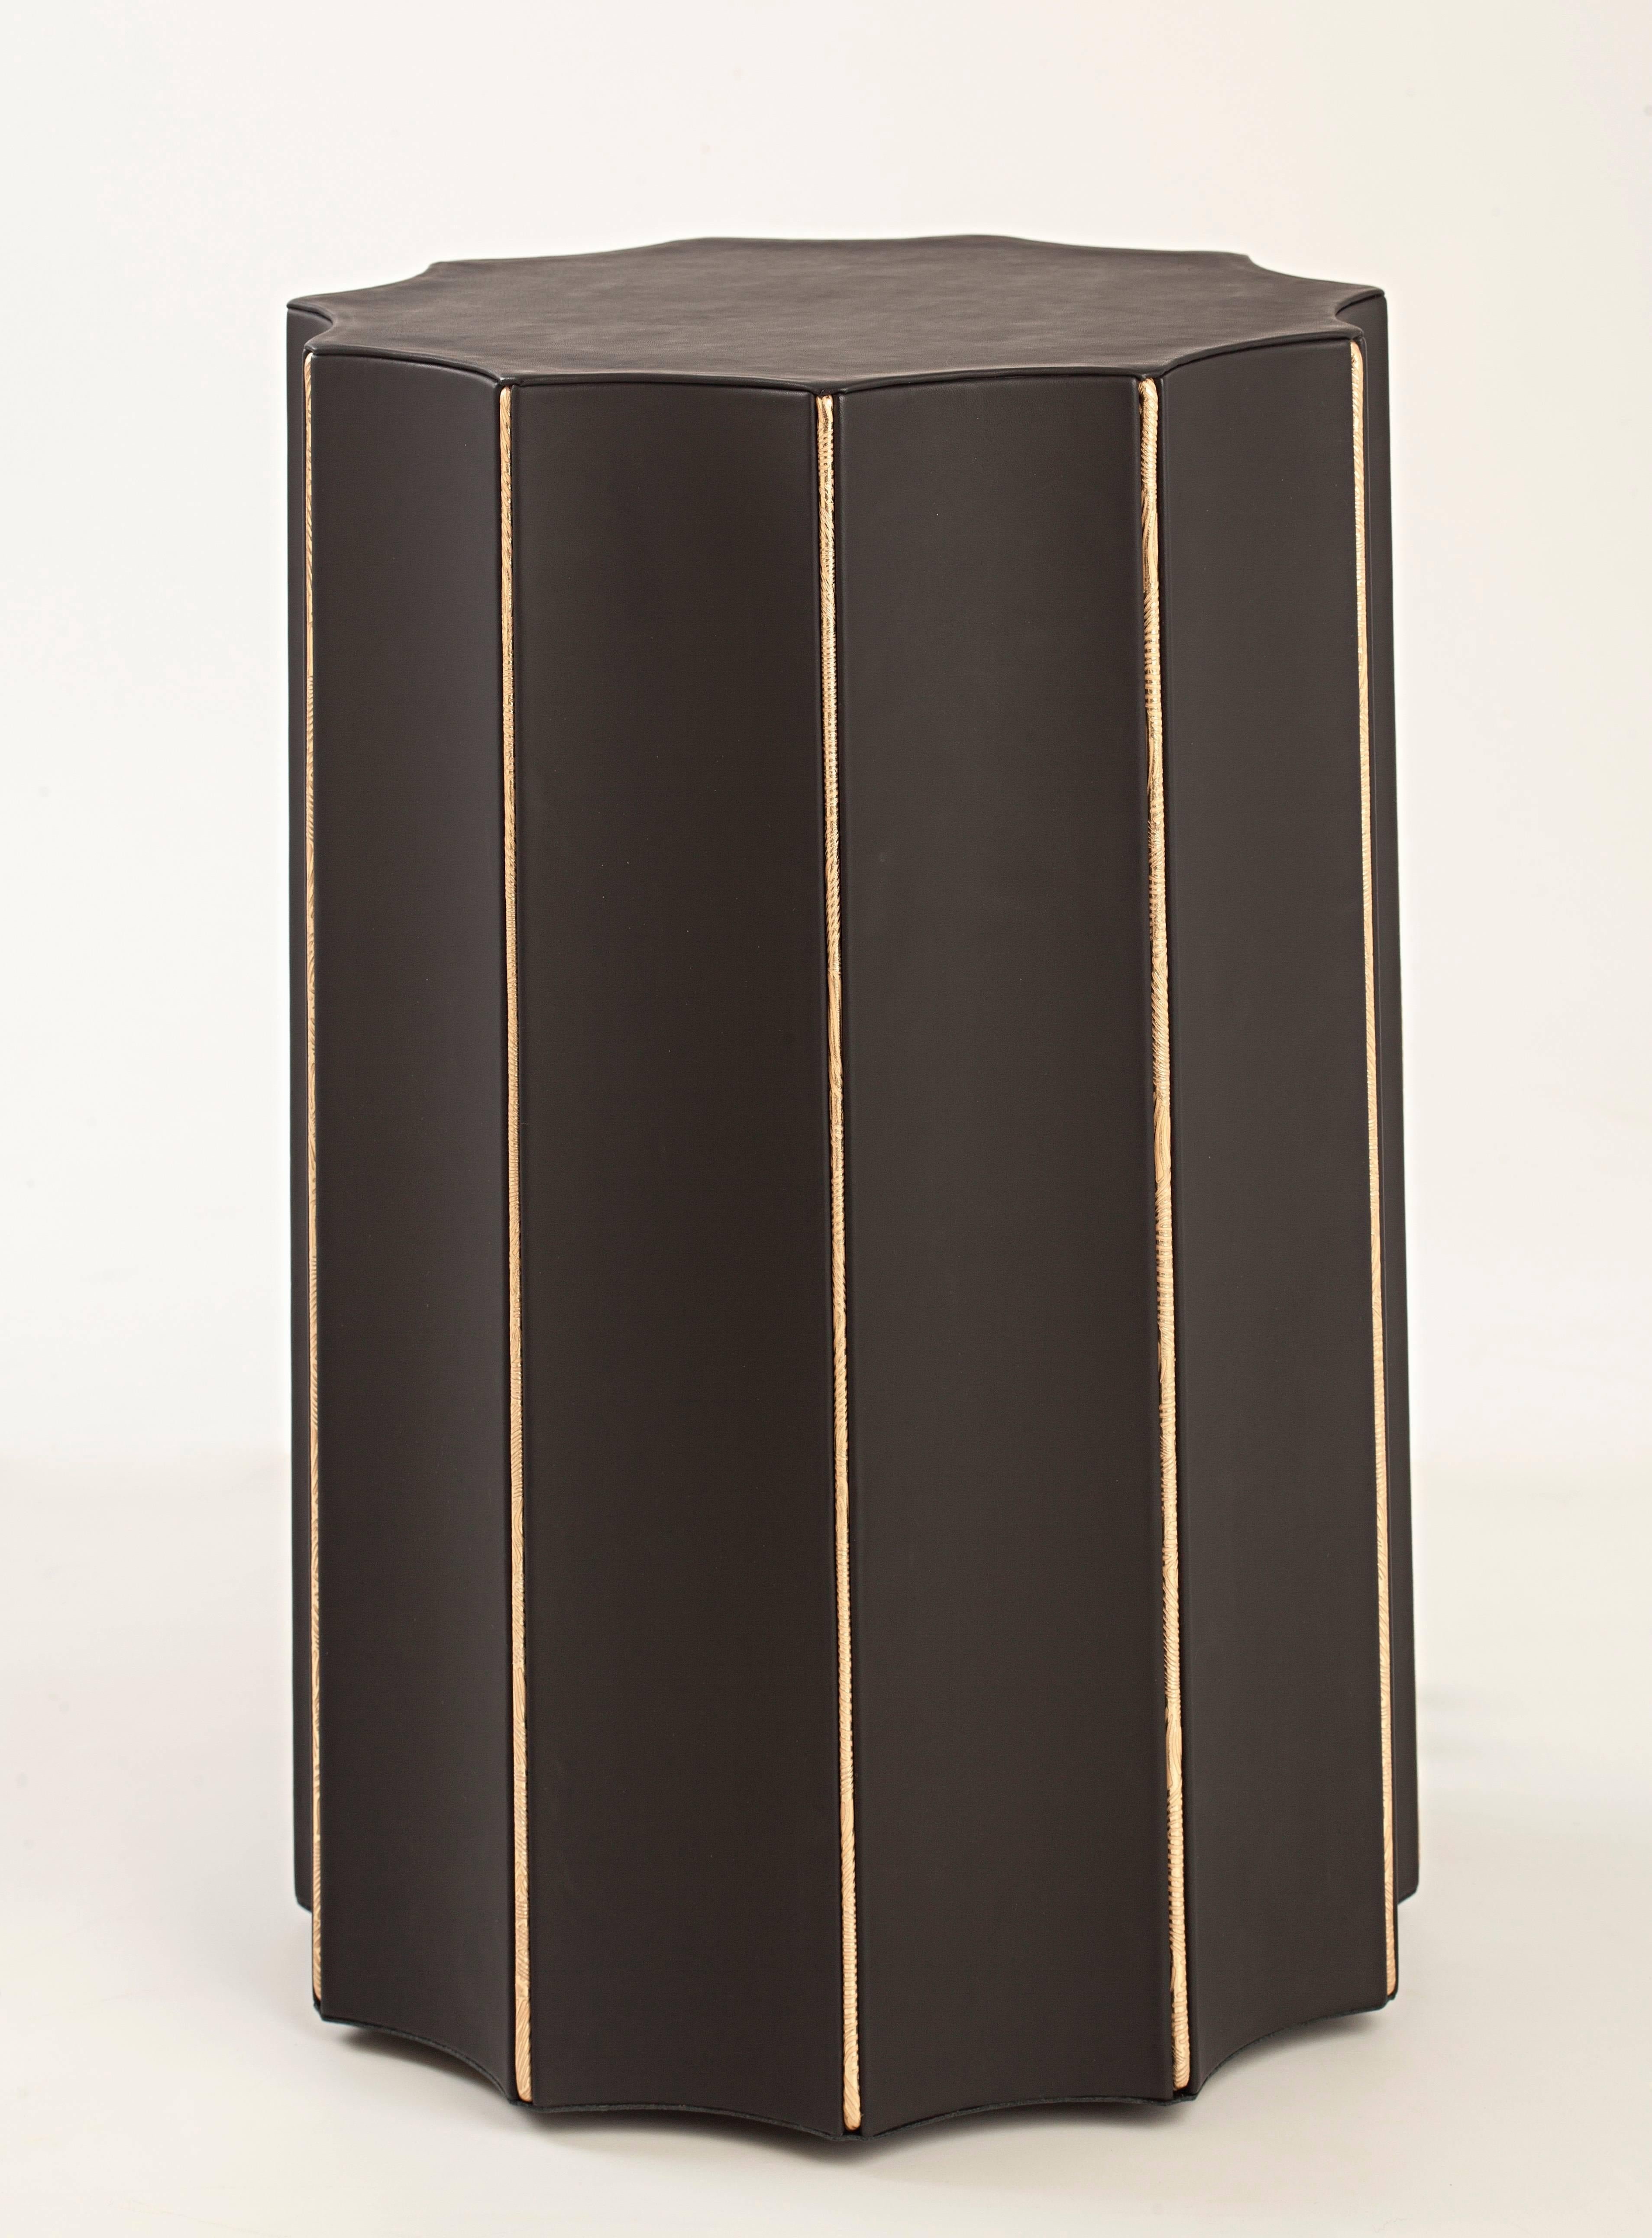 Inspired by the exoskeleton of a Seahorse, André Poli designed these stools using a sculpted wood base and hand-stitched two-tone leather. These stools are new and can be ordered in multiple color variations. Please contact dealer for